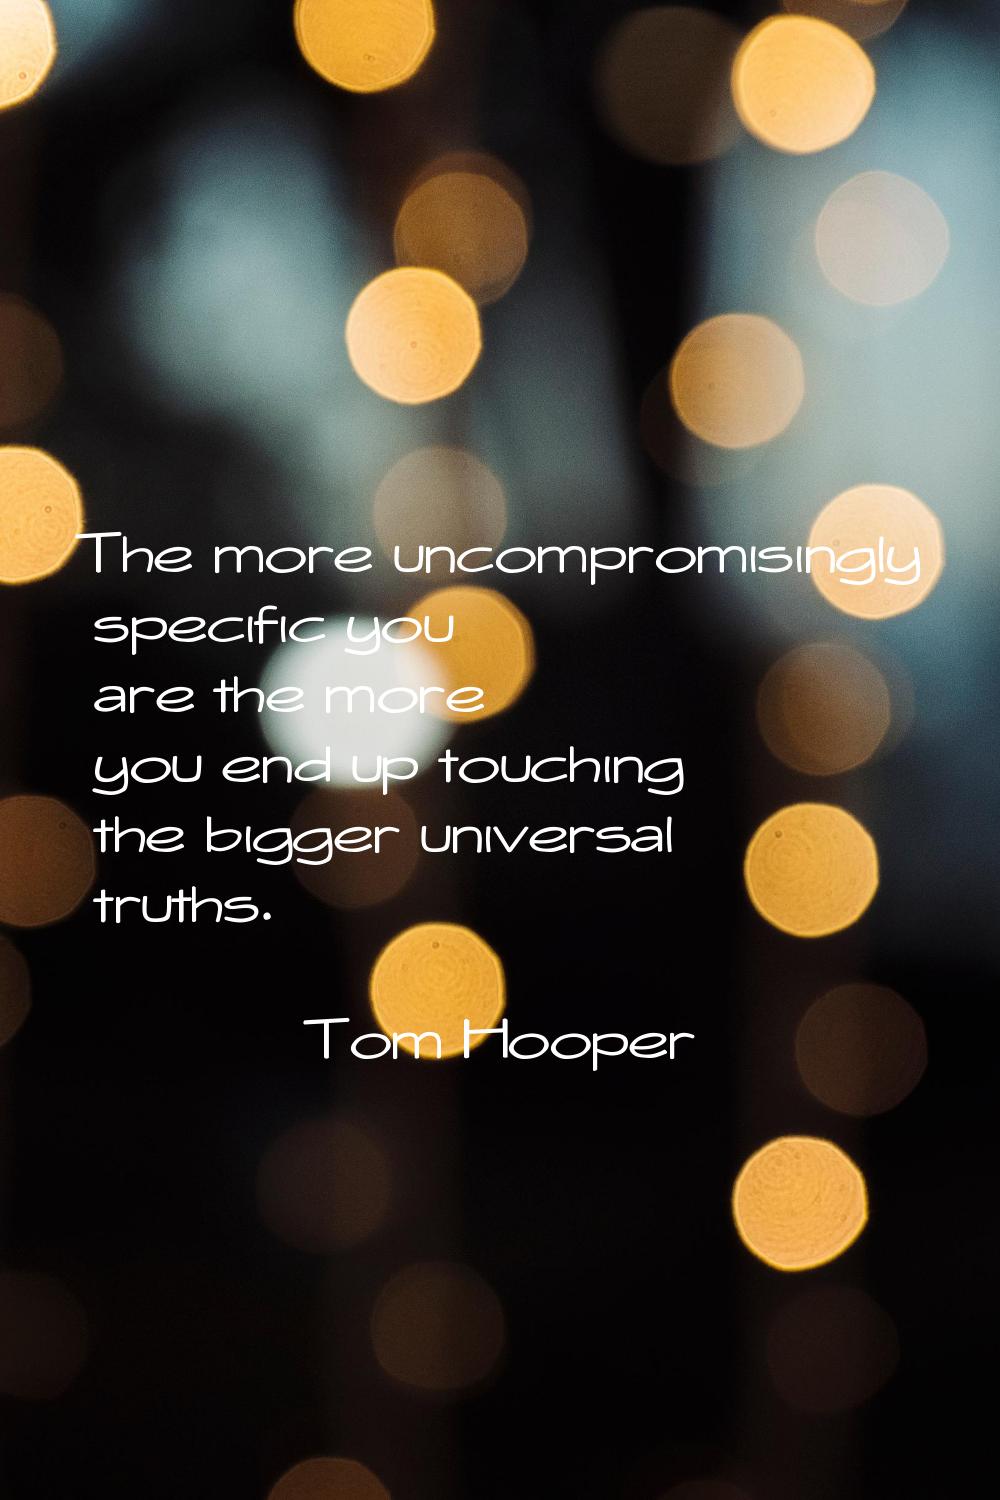 The more uncompromisingly specific you are the more you end up touching the bigger universal truths